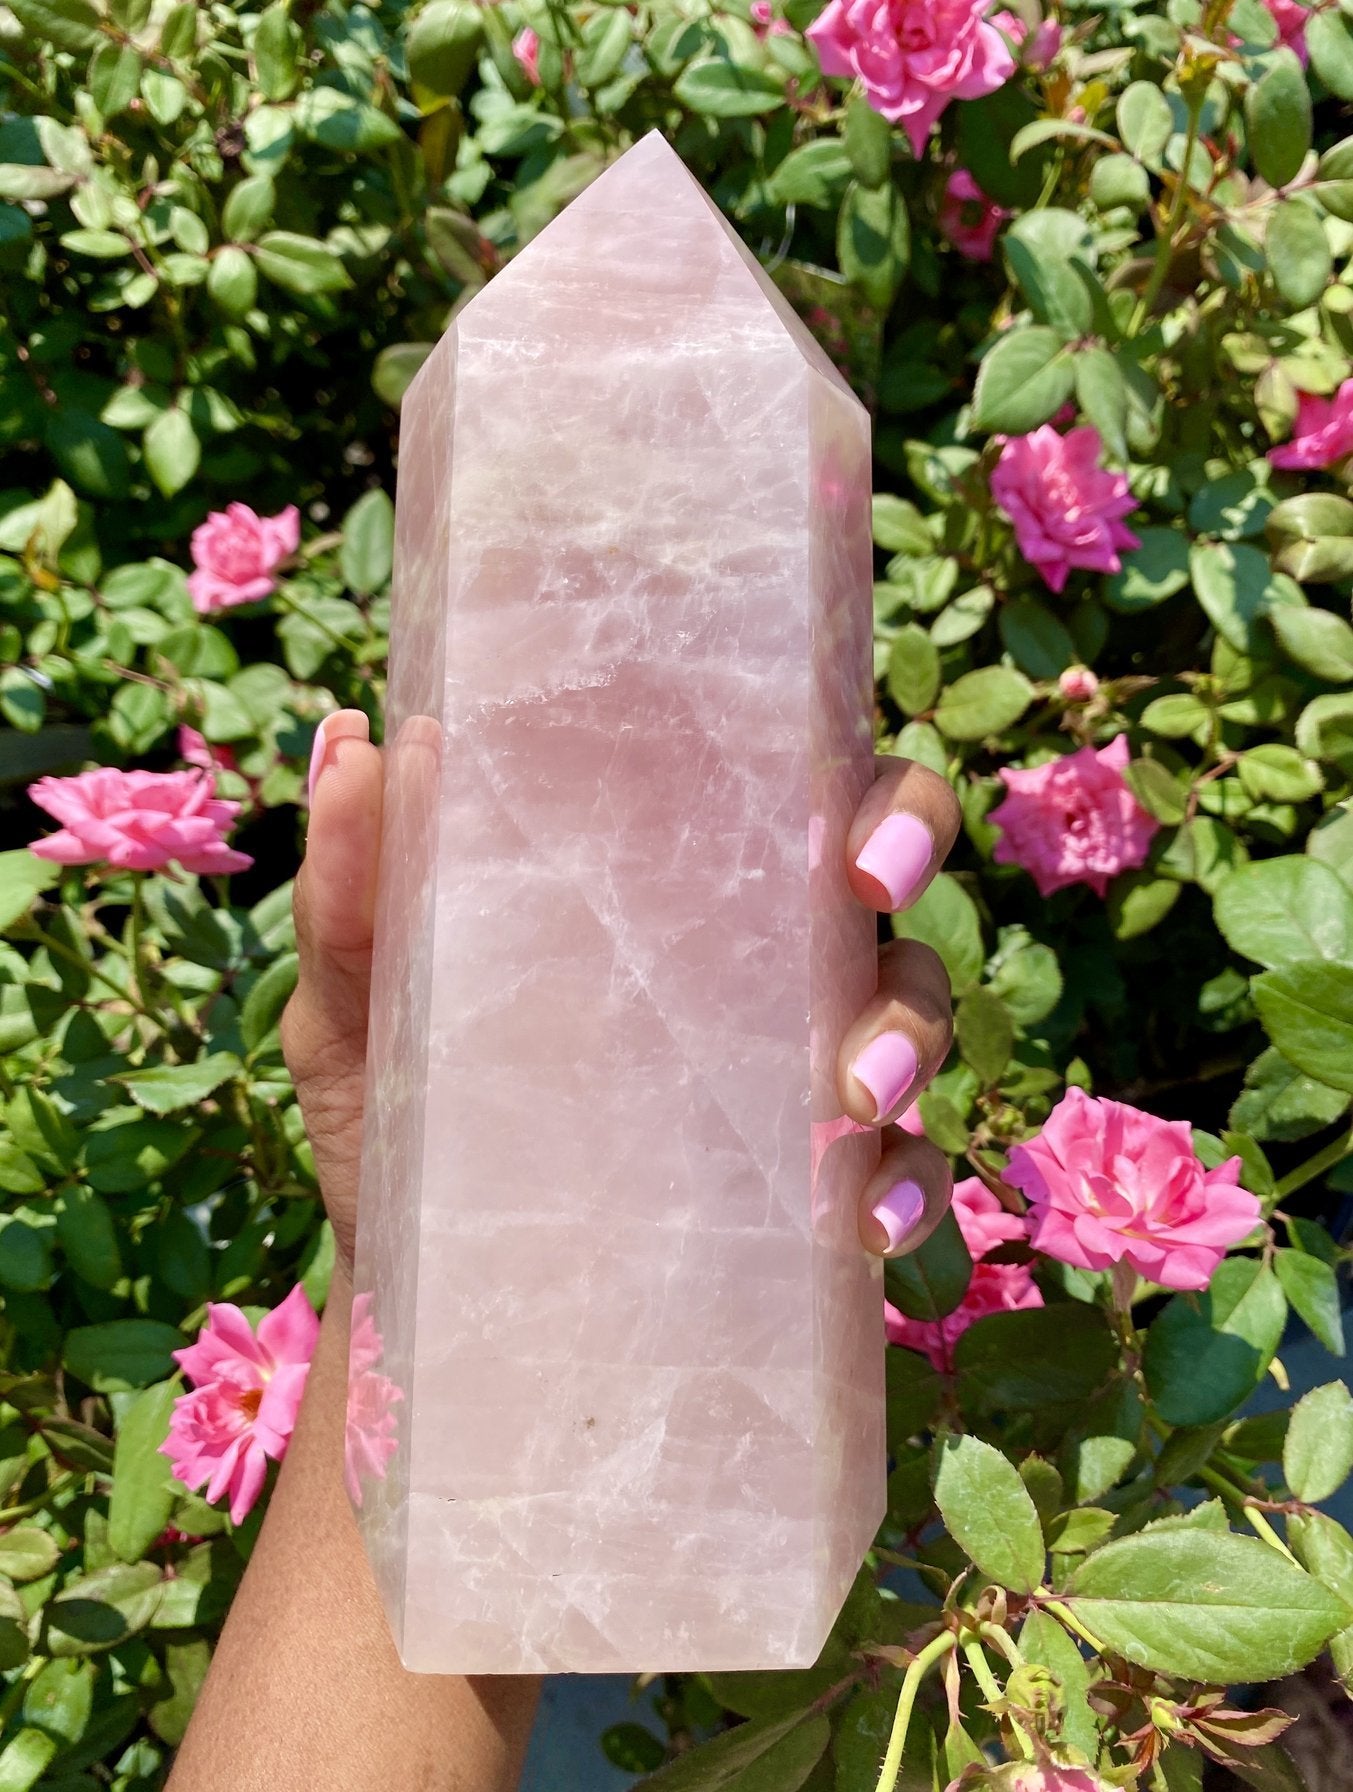 Extra Large Rose Quartz tower held over pink flowers. Rose Quartz is a gem for universal love. It helps us to see beyond unhealthy thoughts to love ourselves and others.